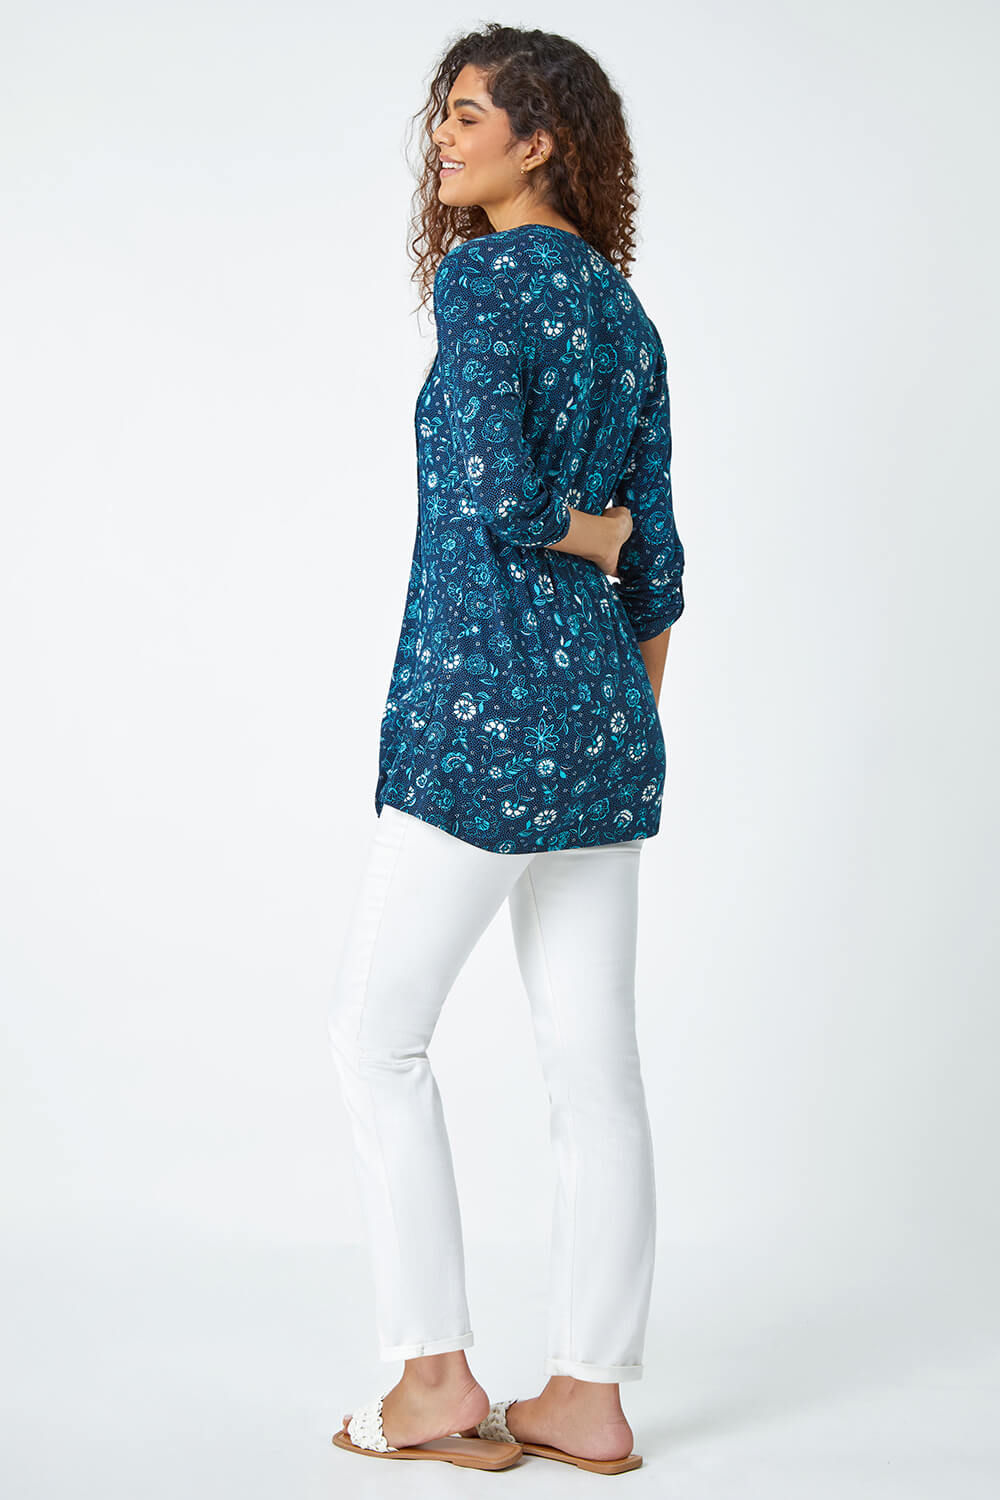 Teal Ditsy Floral Pintuck Stretch Top, Image 3 of 5